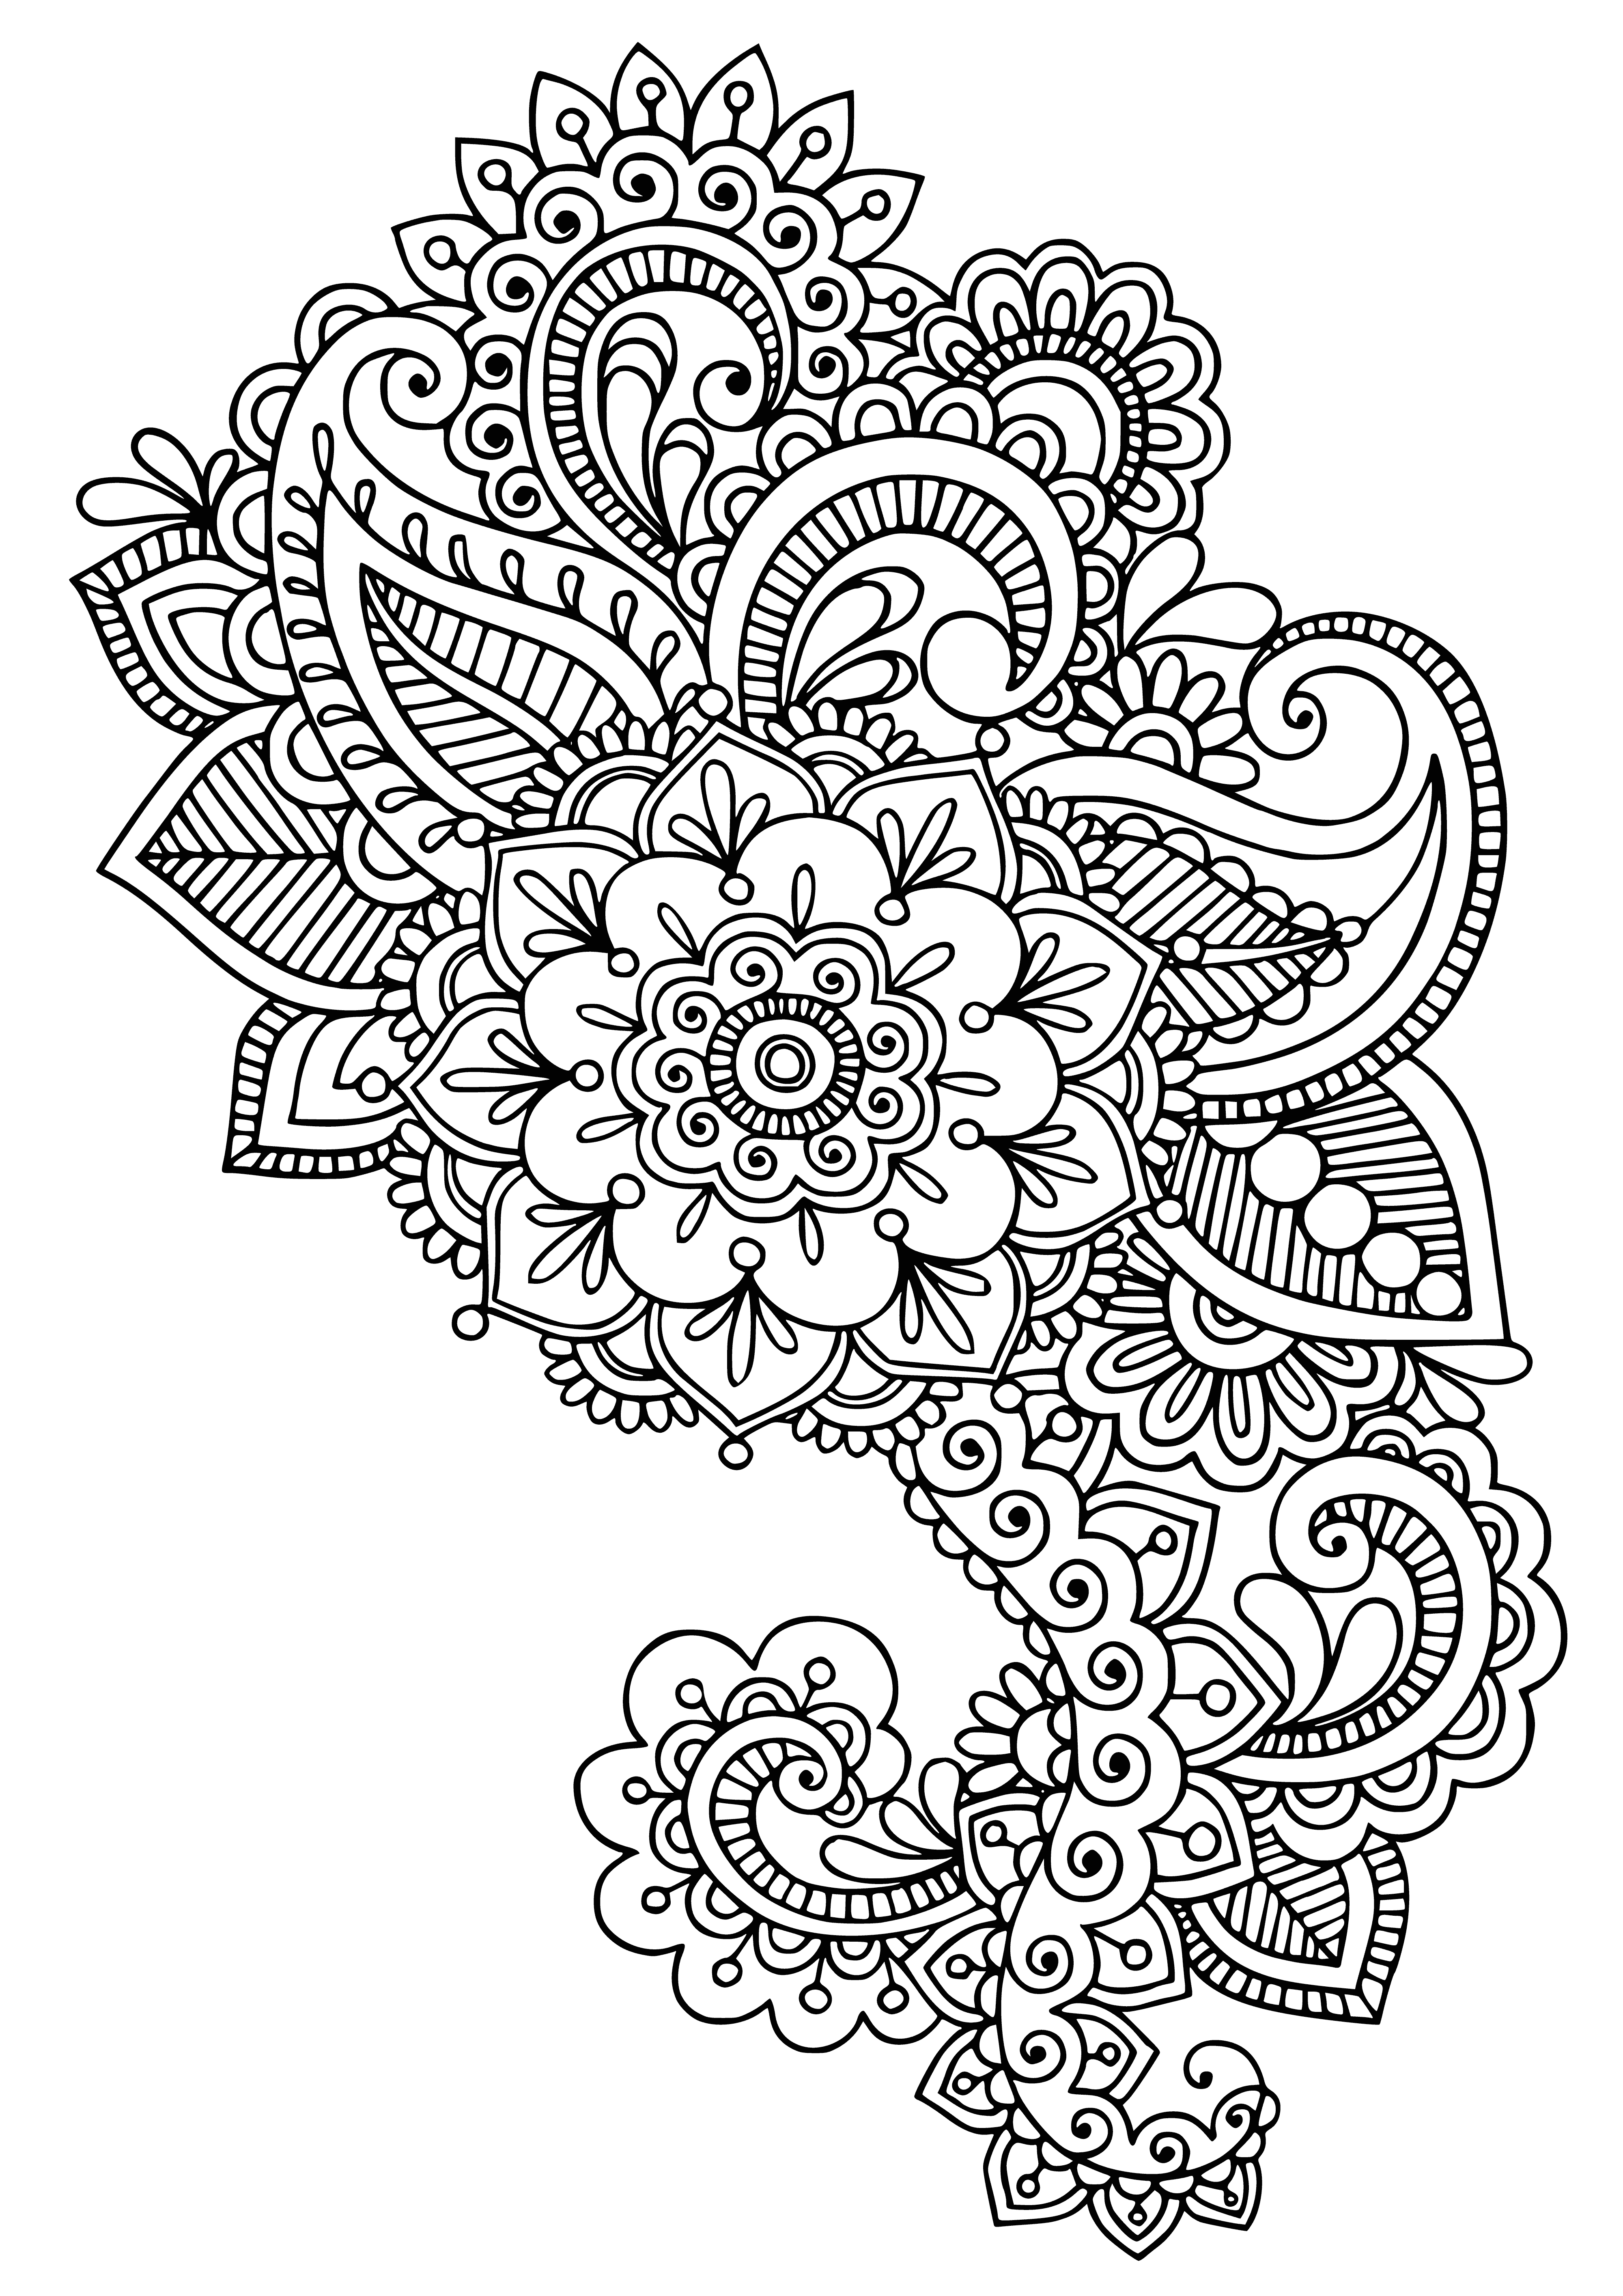 coloring page: Large & small flowers in unique shapes & colors create a multihued pattern of petals, leaves & stems.